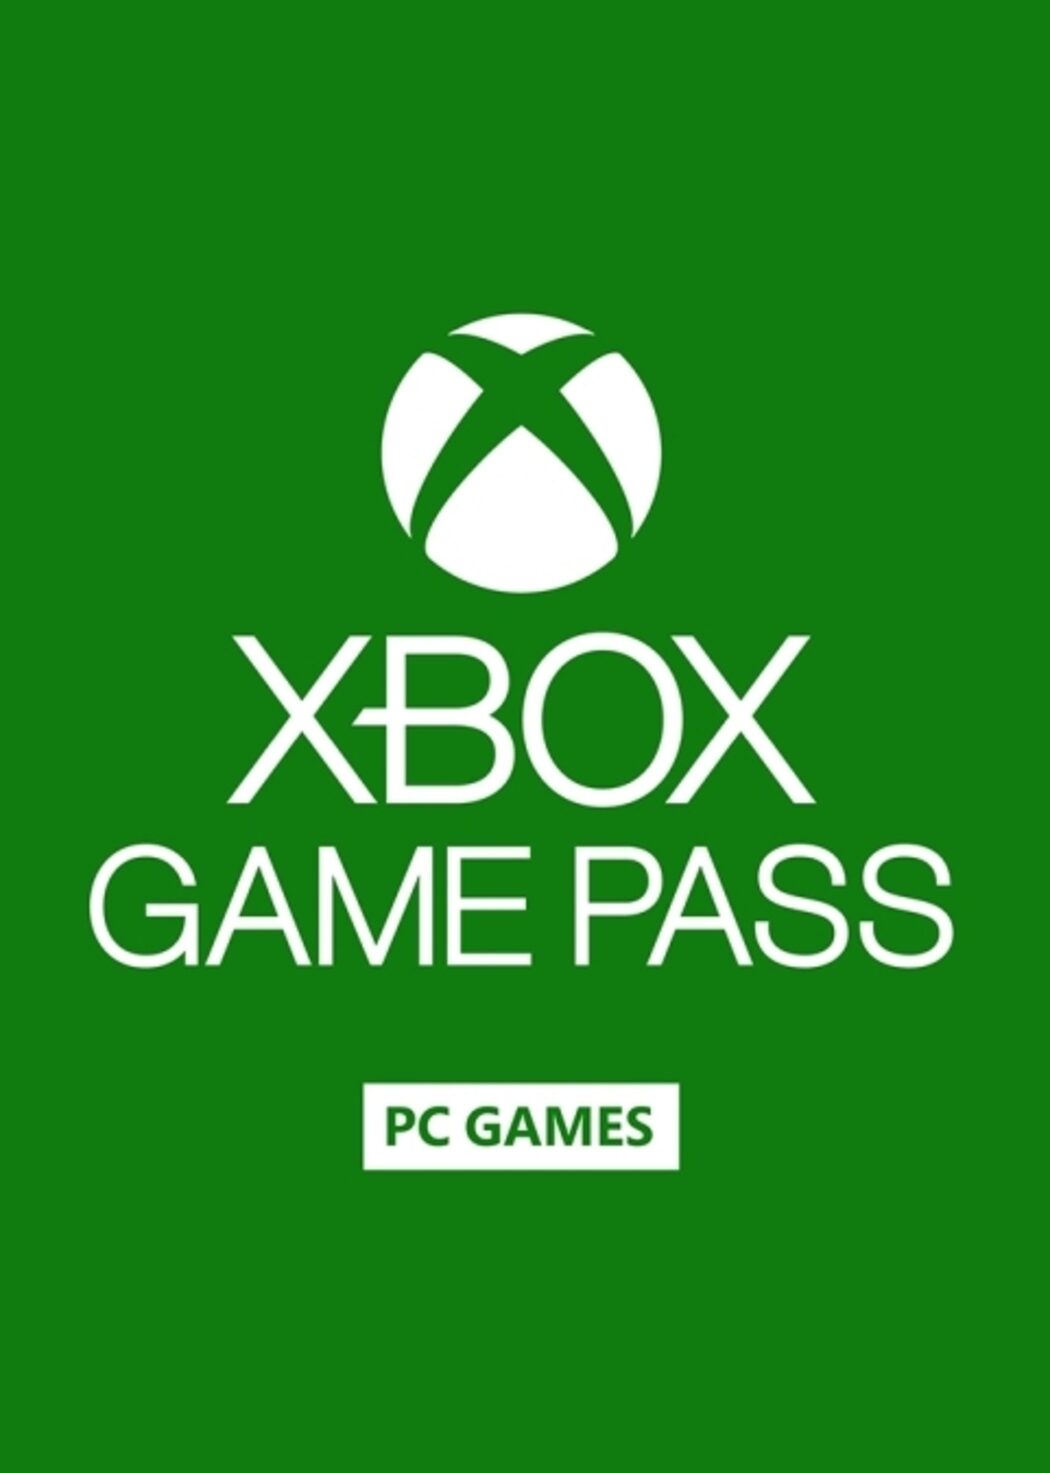 Buy Xbox Game Pass for PC - 3 Month TRIAL Key! Cheap Price